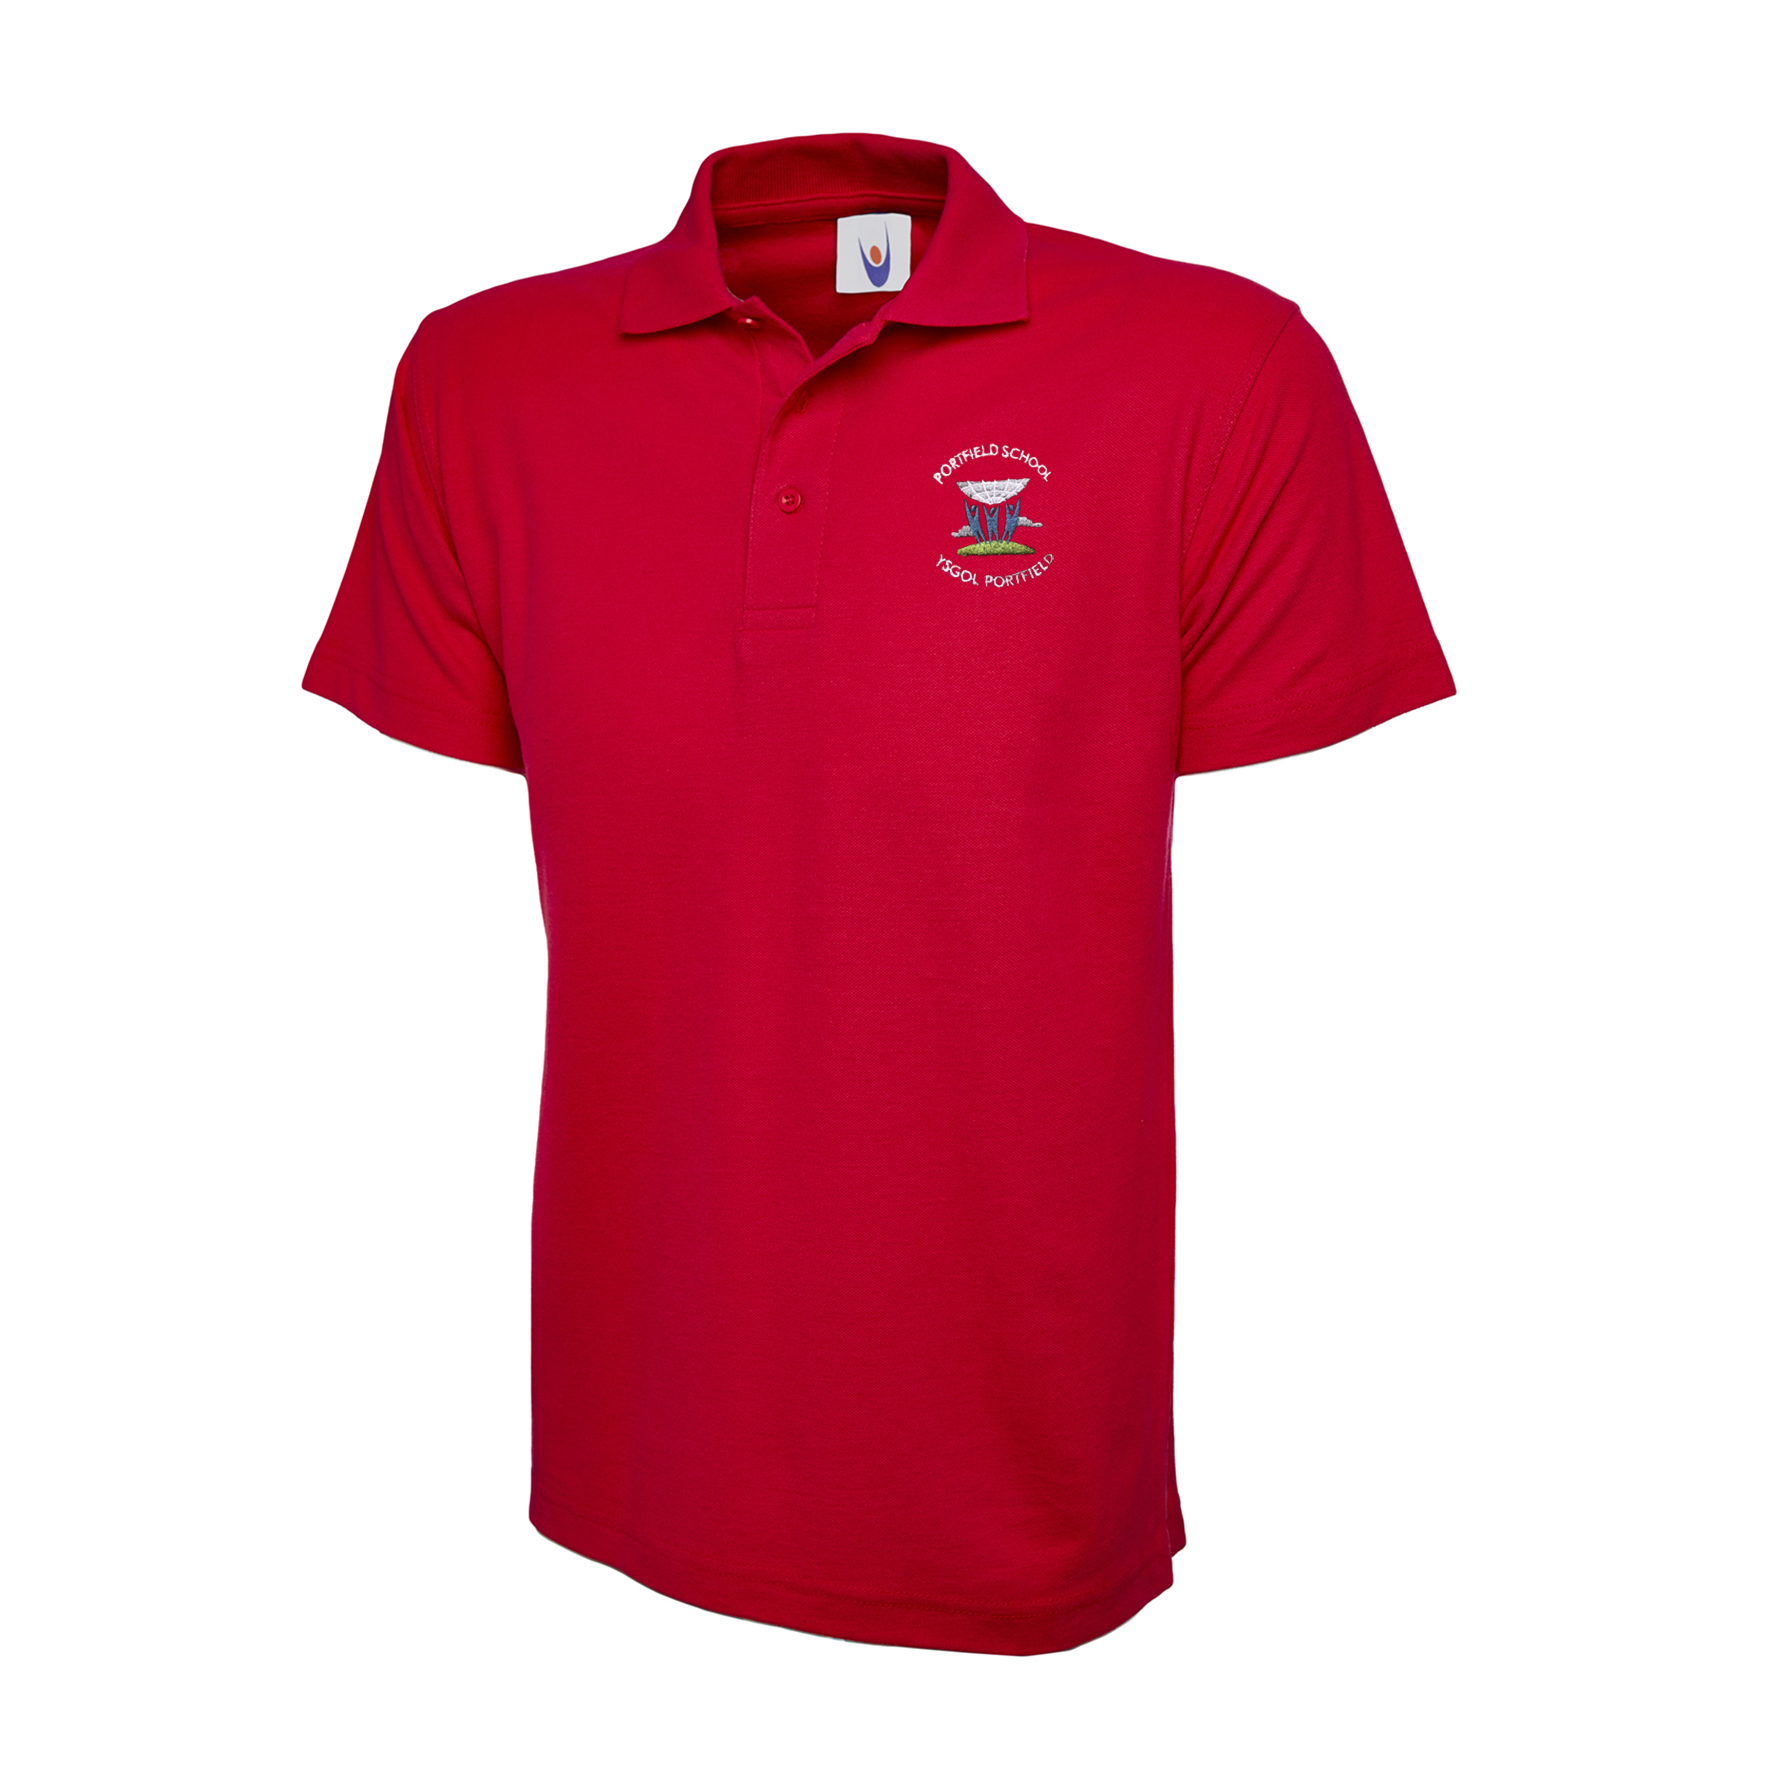 Ysgol Portfield Unisex Red Polo Shirt - Tees R Us Embroidery and Print